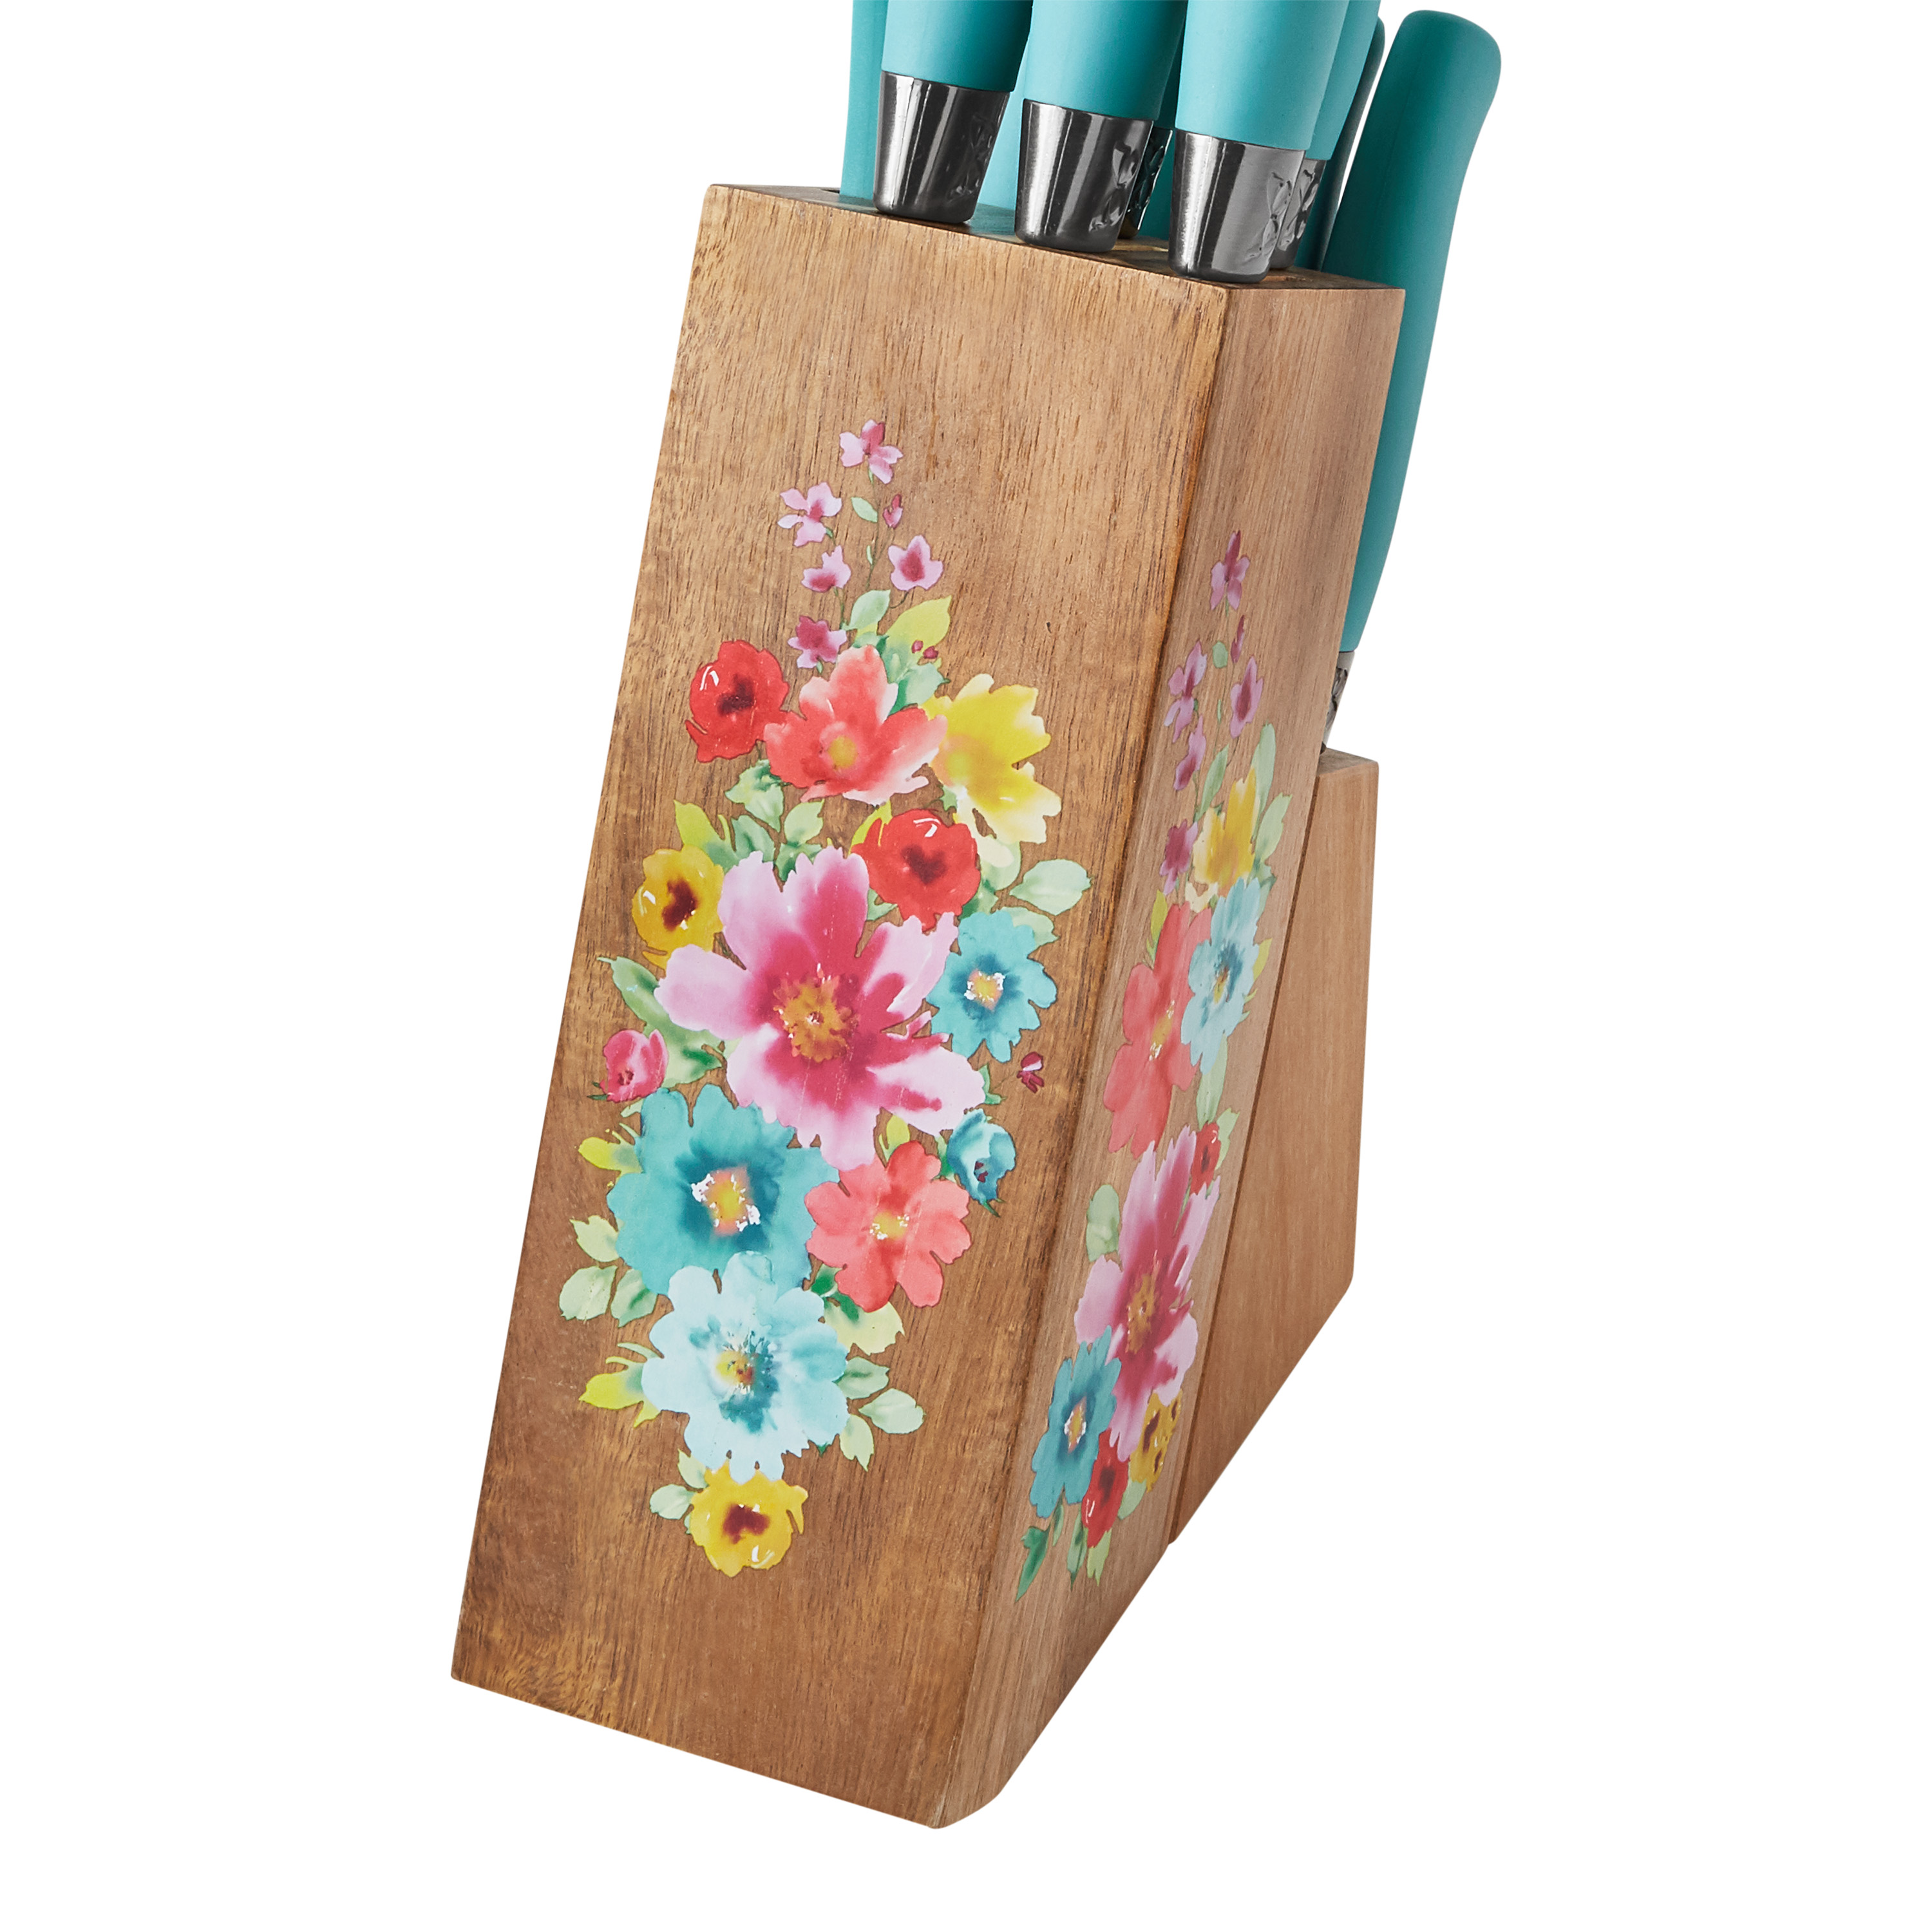 The Pioneer Woman Breezy Blossoms 11-Piece Stainless Steel Knife Block Set, Teal - image 5 of 5